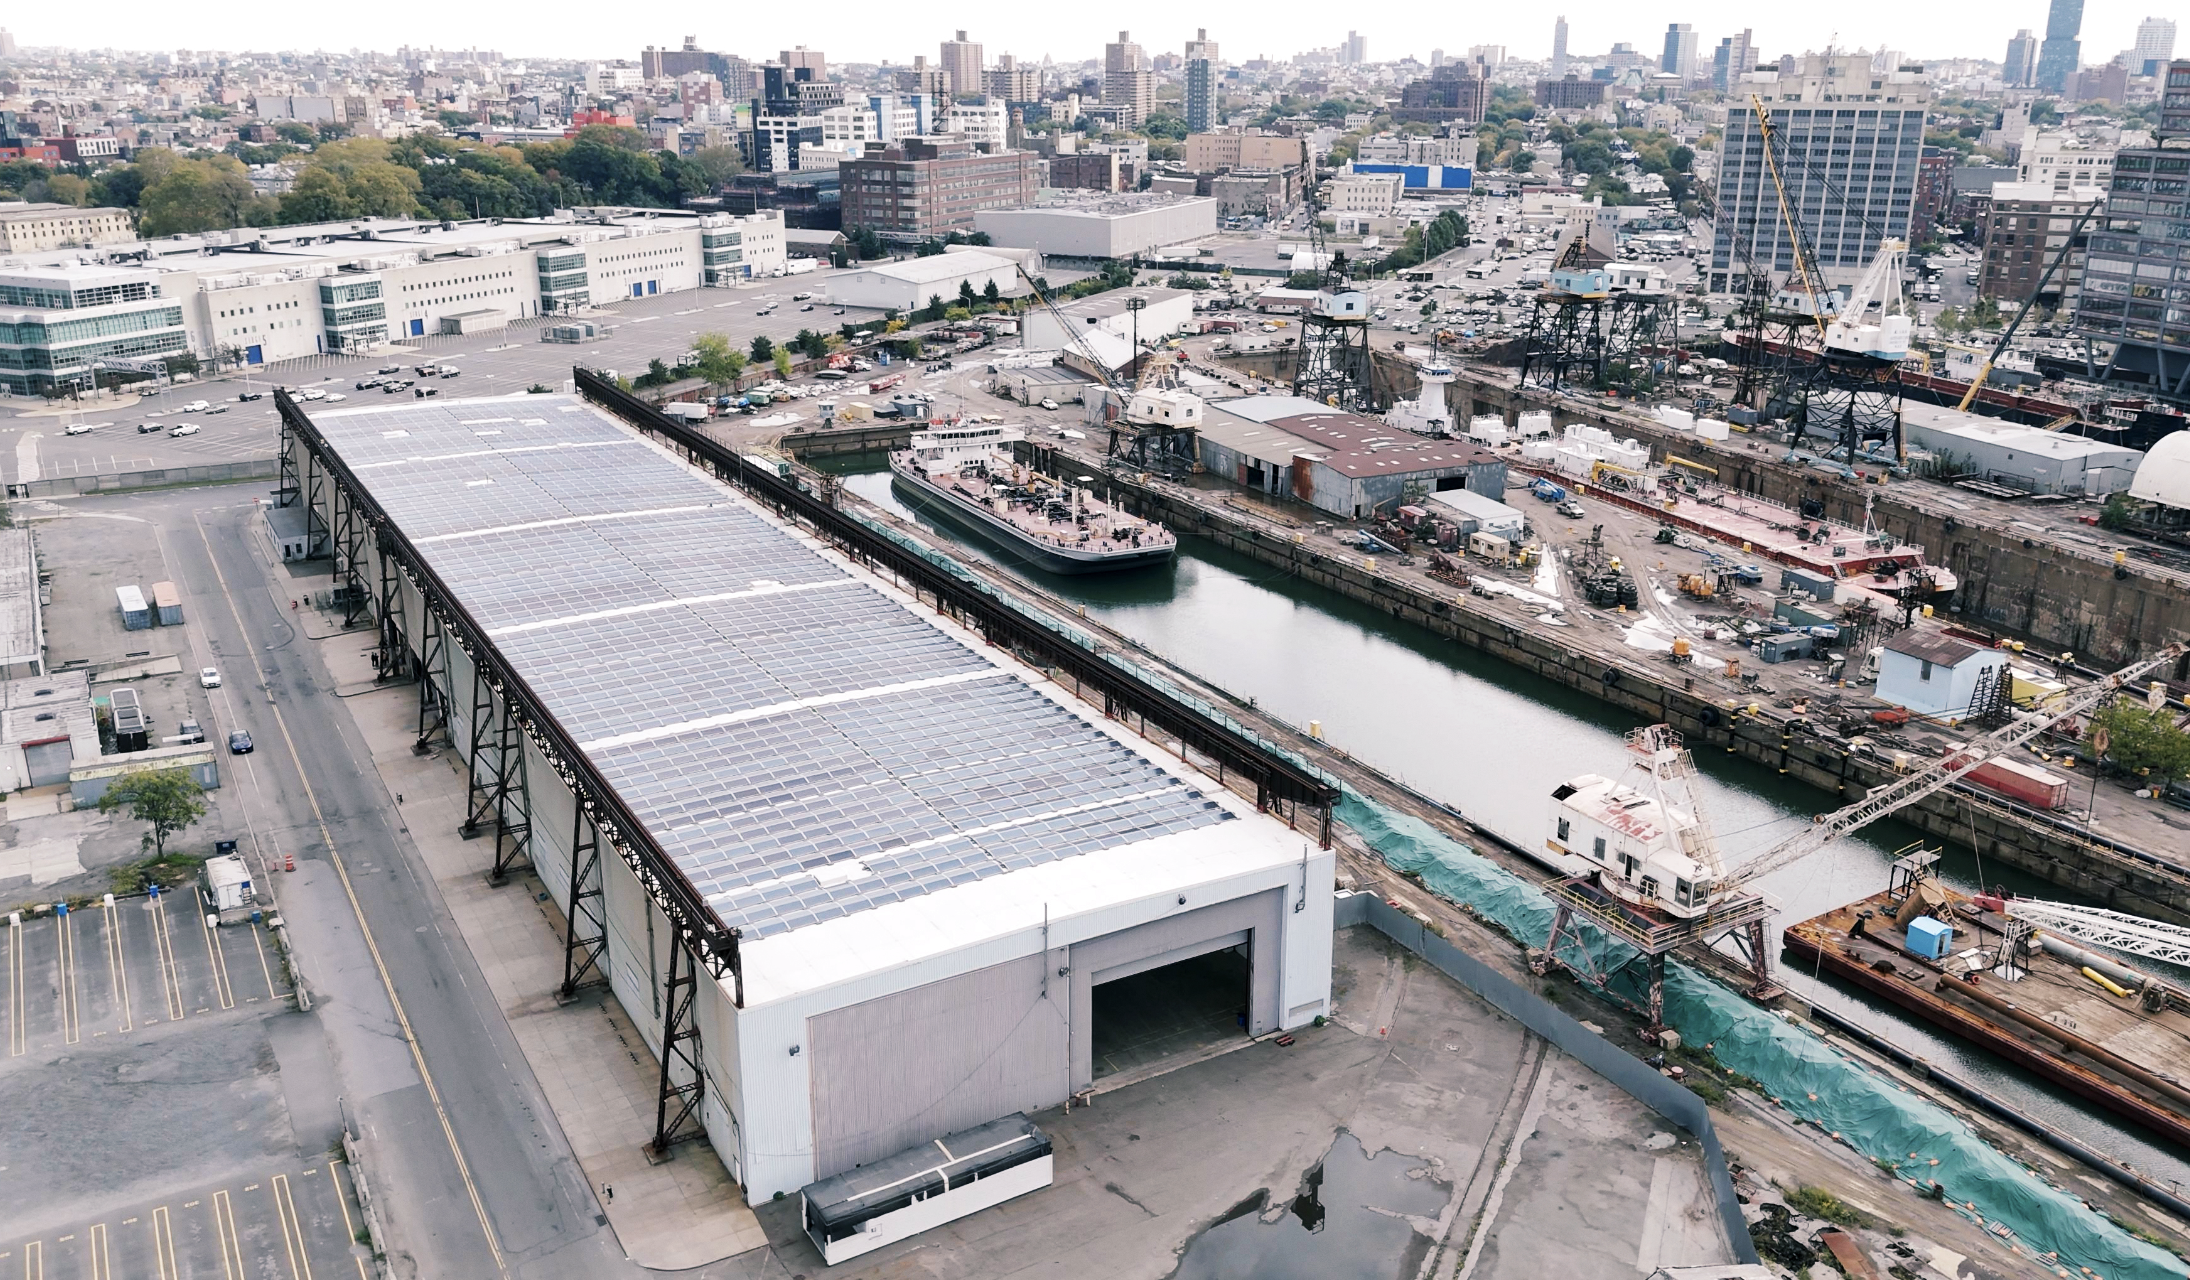 A gigantic new event center is opening by the Brooklyn Navy Yard